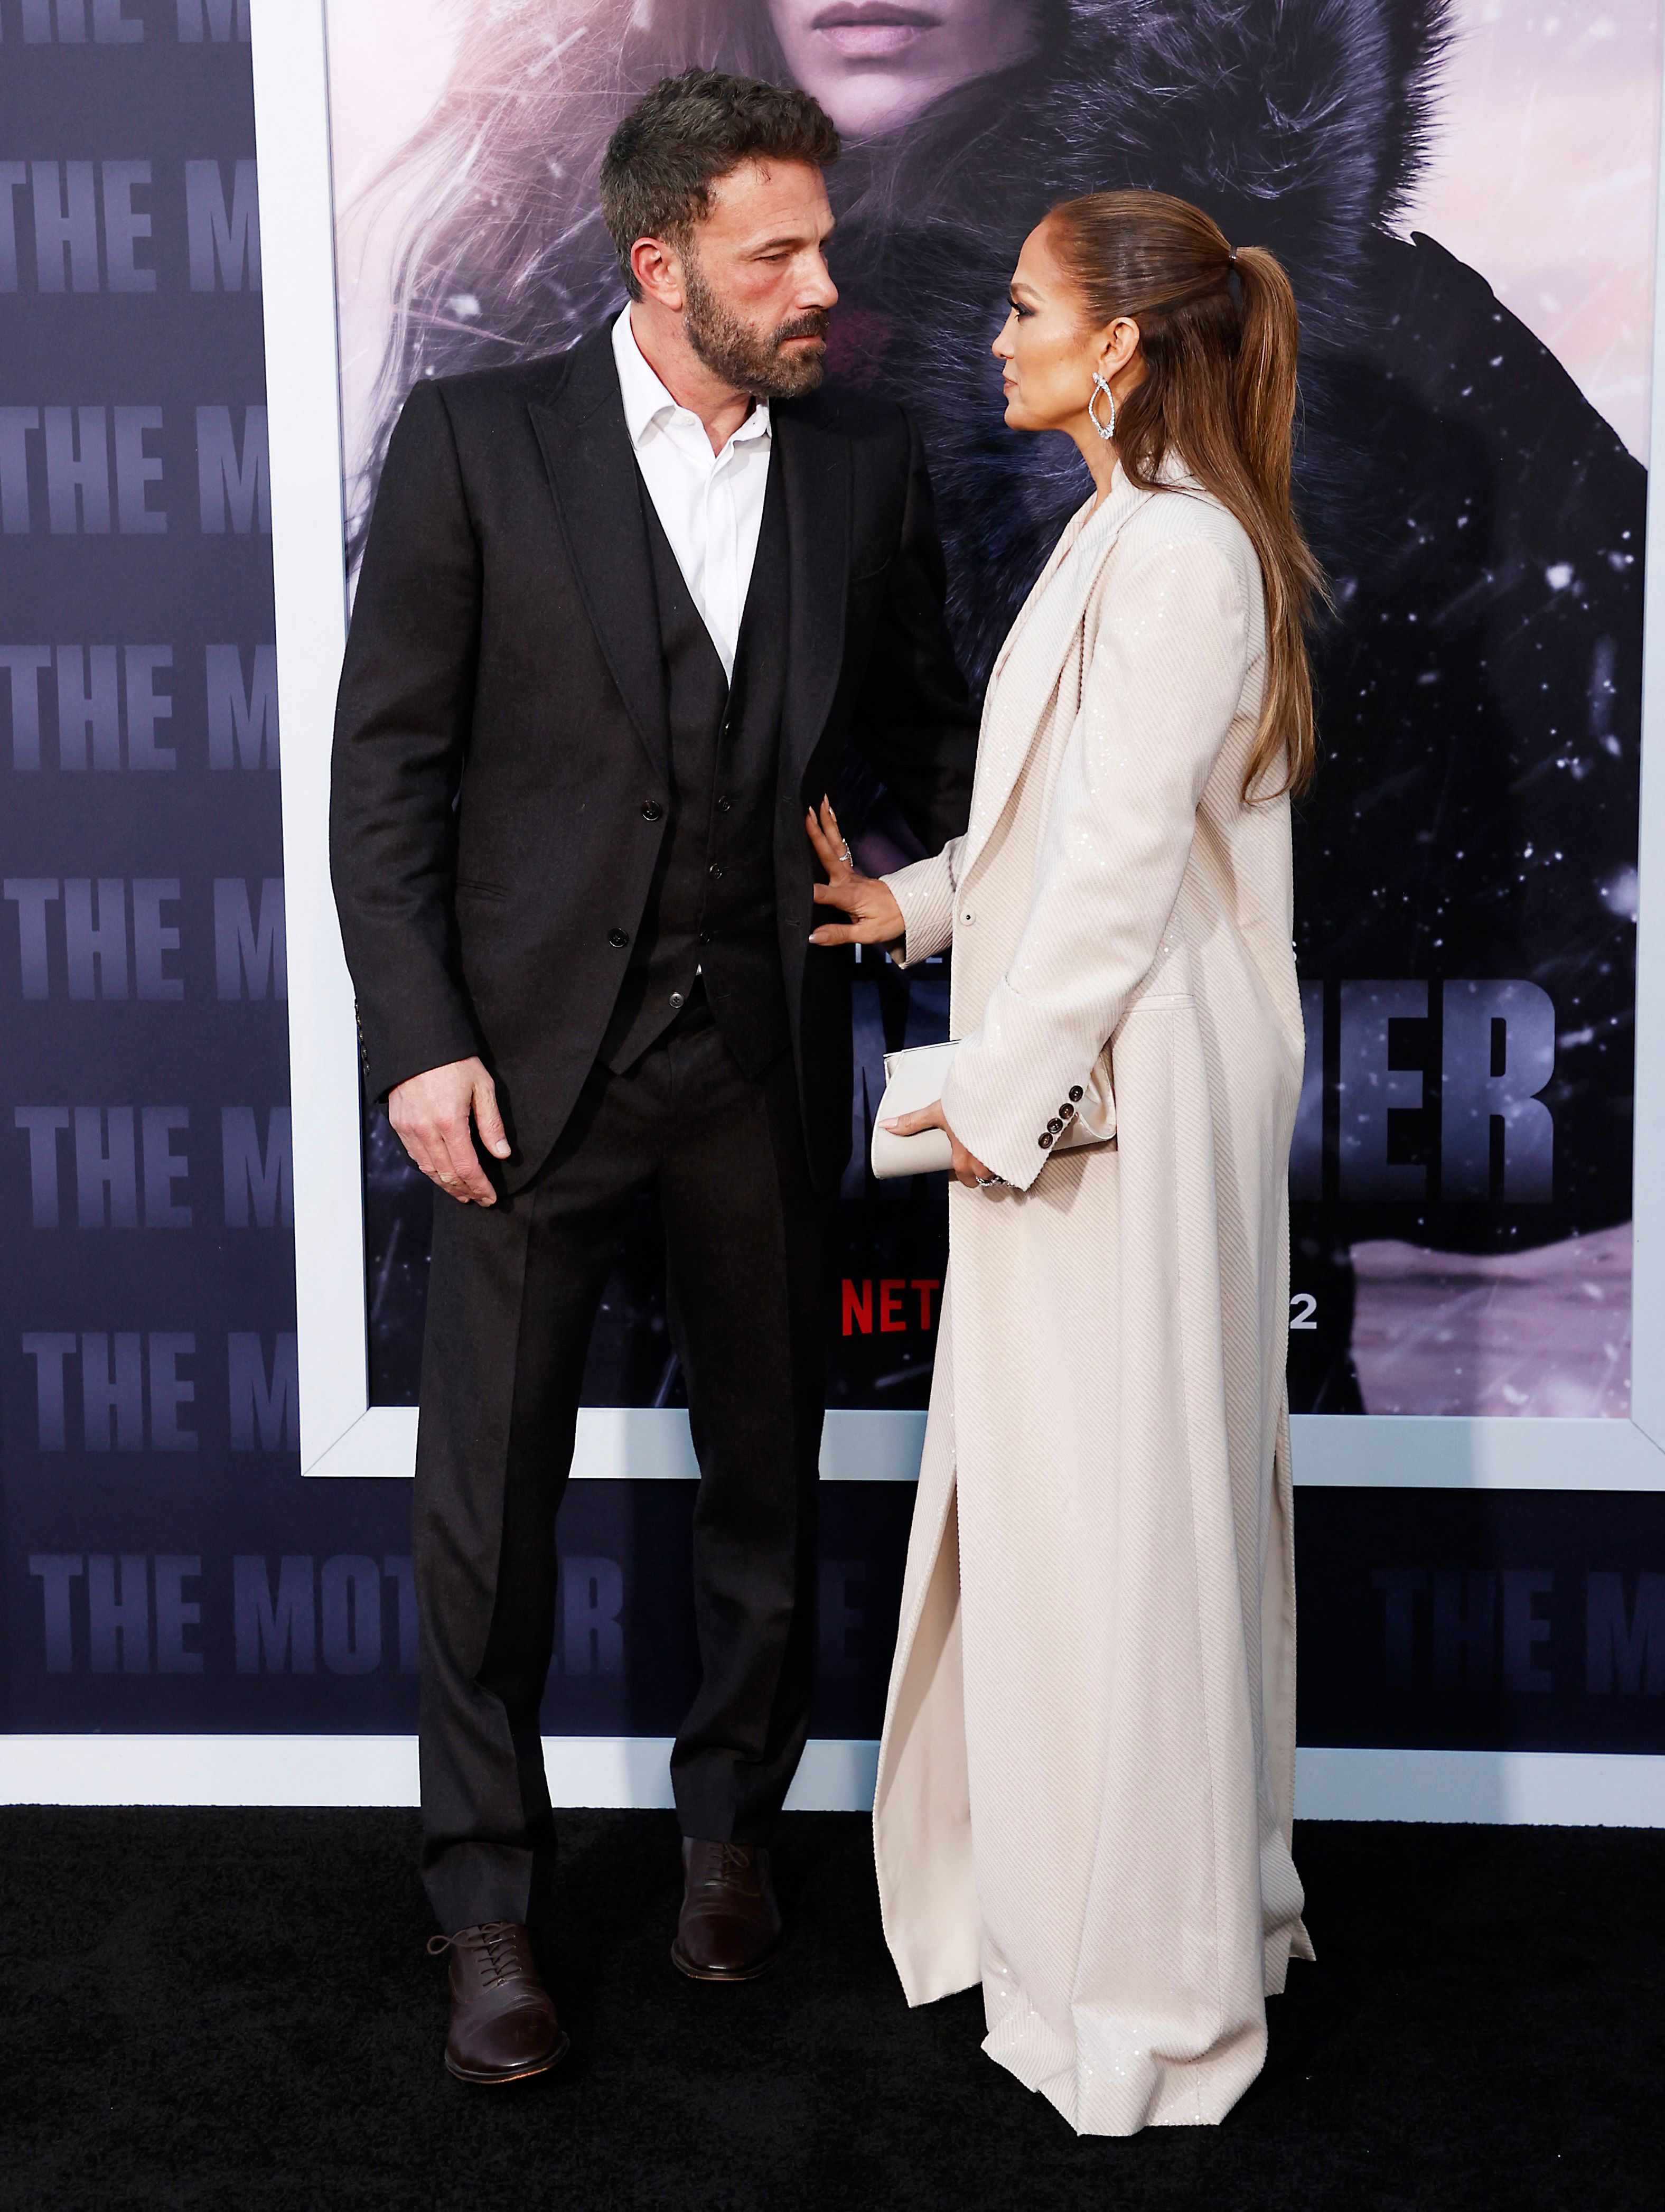 Ben Affleck and Jennifer Lopez at the premiere of "The Mother" in Los Angeles, California, on May 10, 2023 | Source: Getty Images